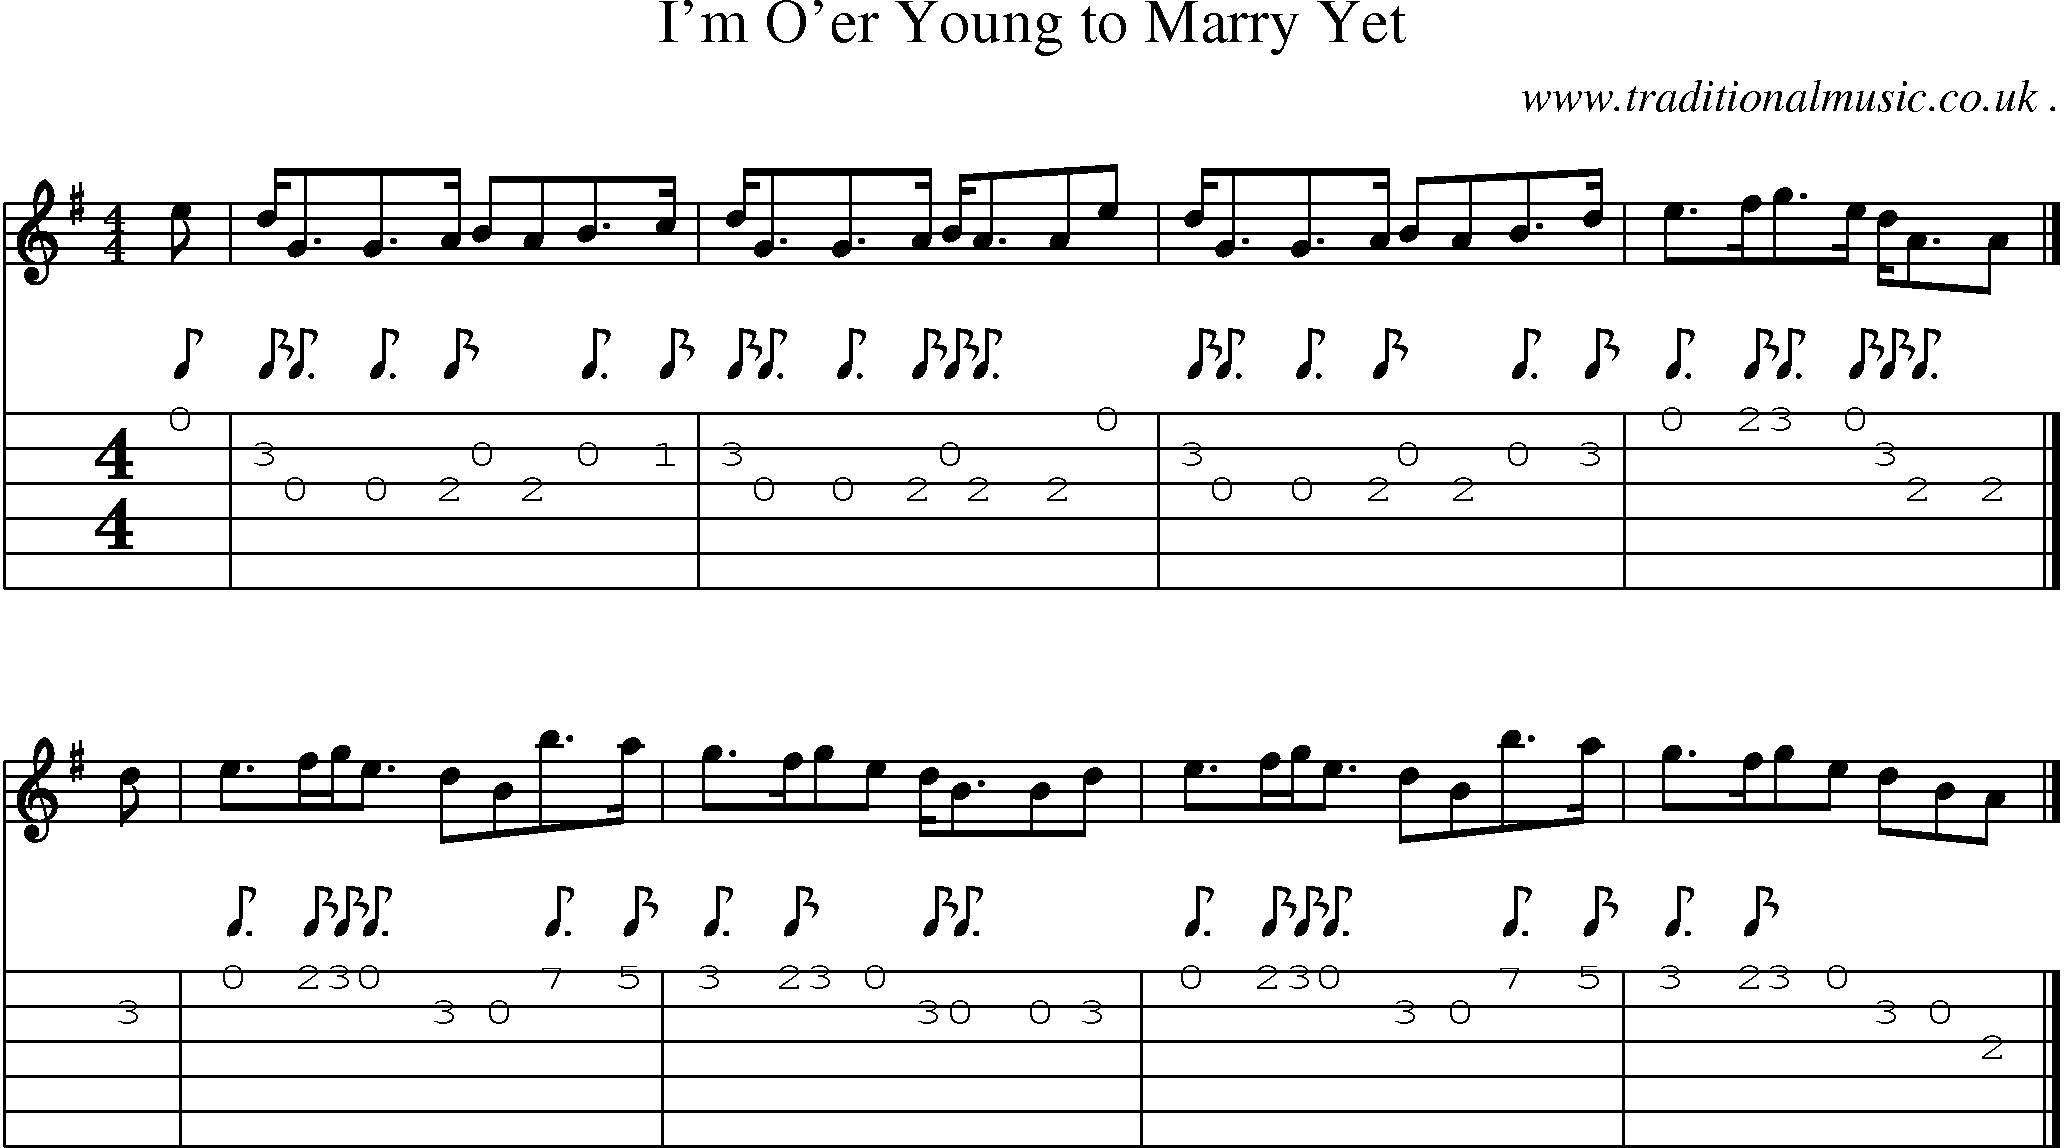 Sheet-music  score, Chords and Guitar Tabs for Im Oer Young To Marry Yet